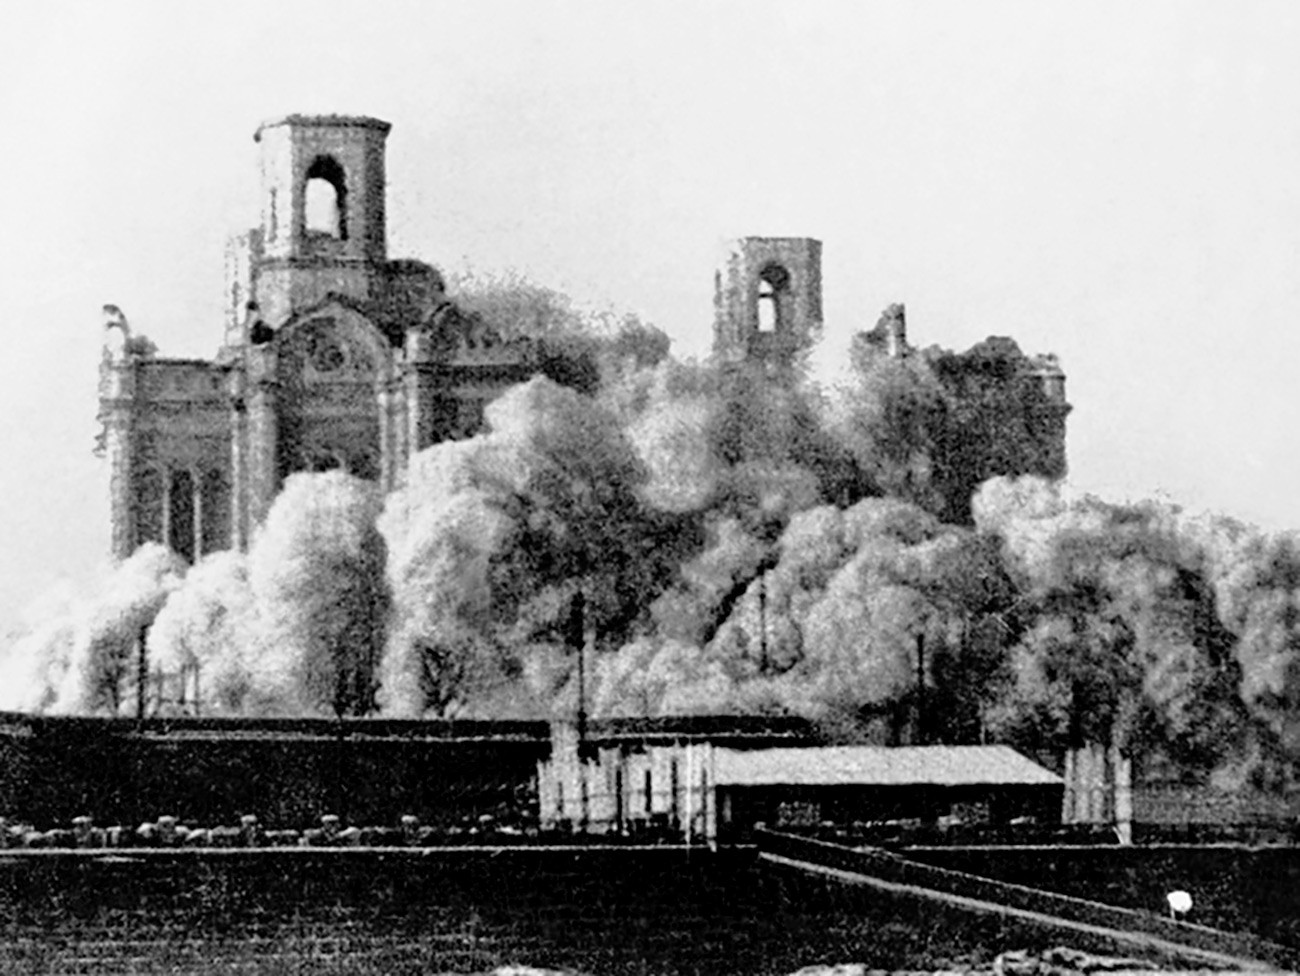 Blowing up the Cathedral of Christ the Savior in 1931